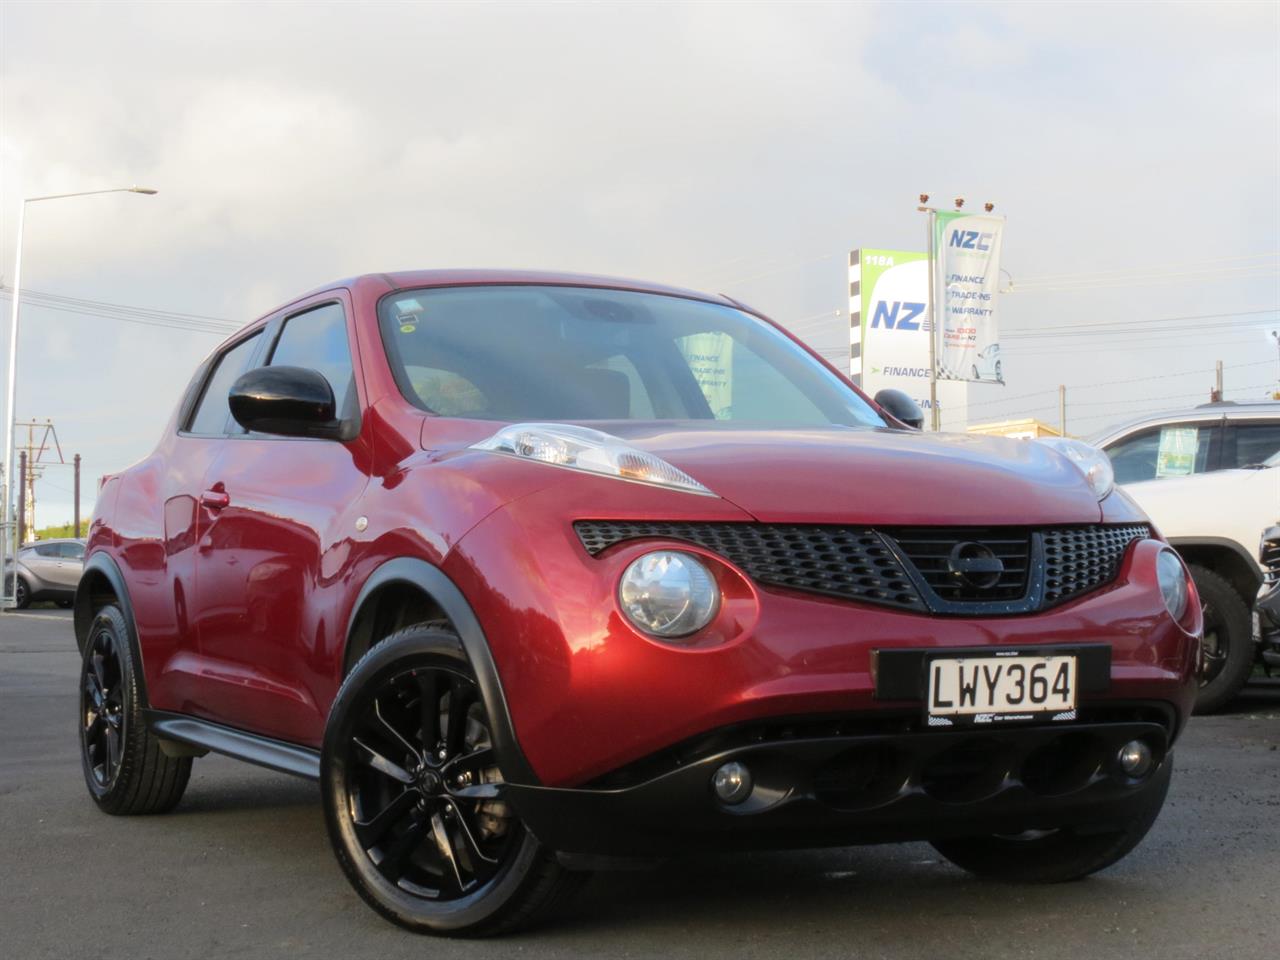 NZC 2012 Nissan JUKE just arrived to Auckland